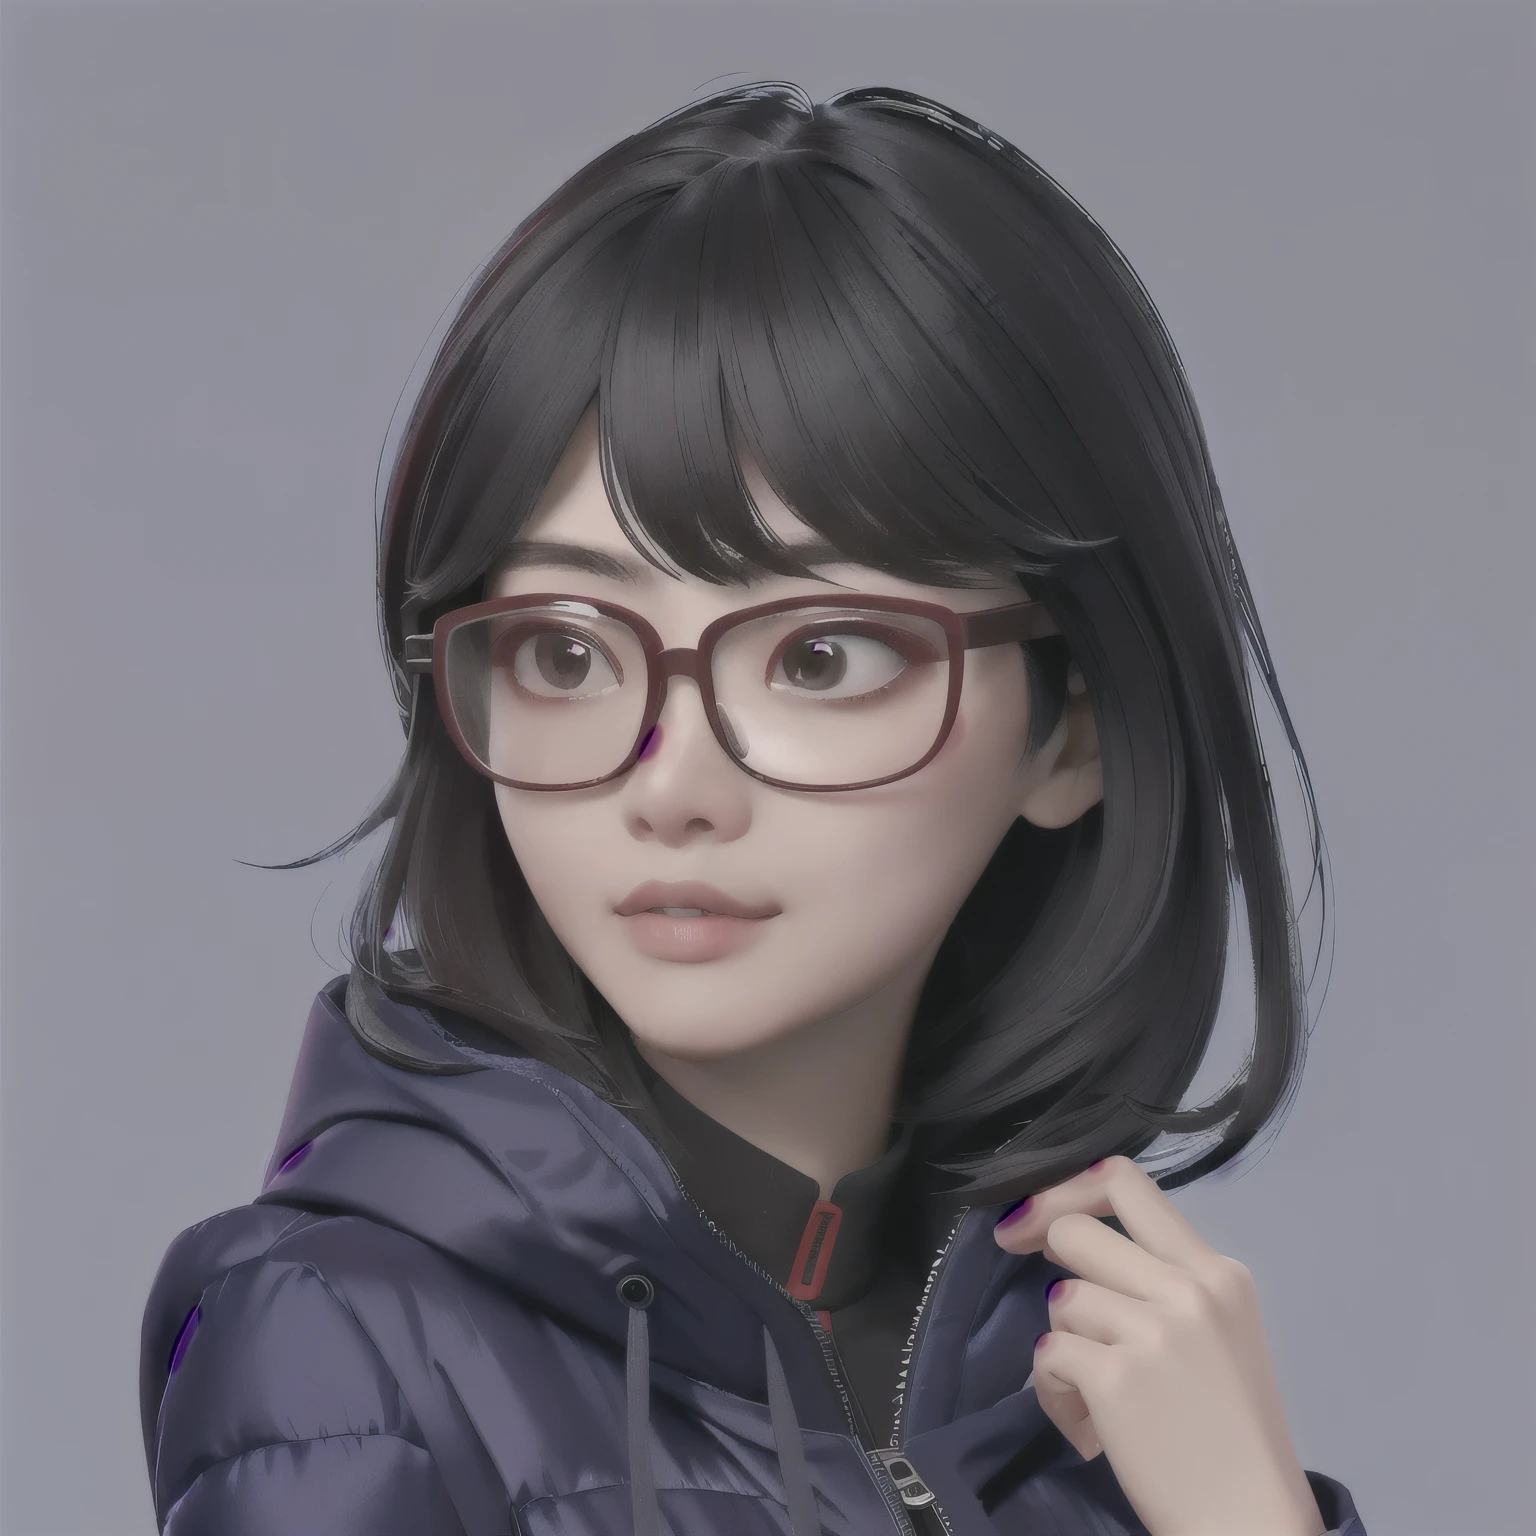 there is a woman wearing glasses and a jacket with a hood, xintong chen, with glasses, wenfei ye, yun ling, qifeng lin, louise zhang, author li zhang, wearing thin large round glasses, chengyou liu, sangsoo jeong, 38 years old, jiyun chae, heonhwa choe, headshot profile picture